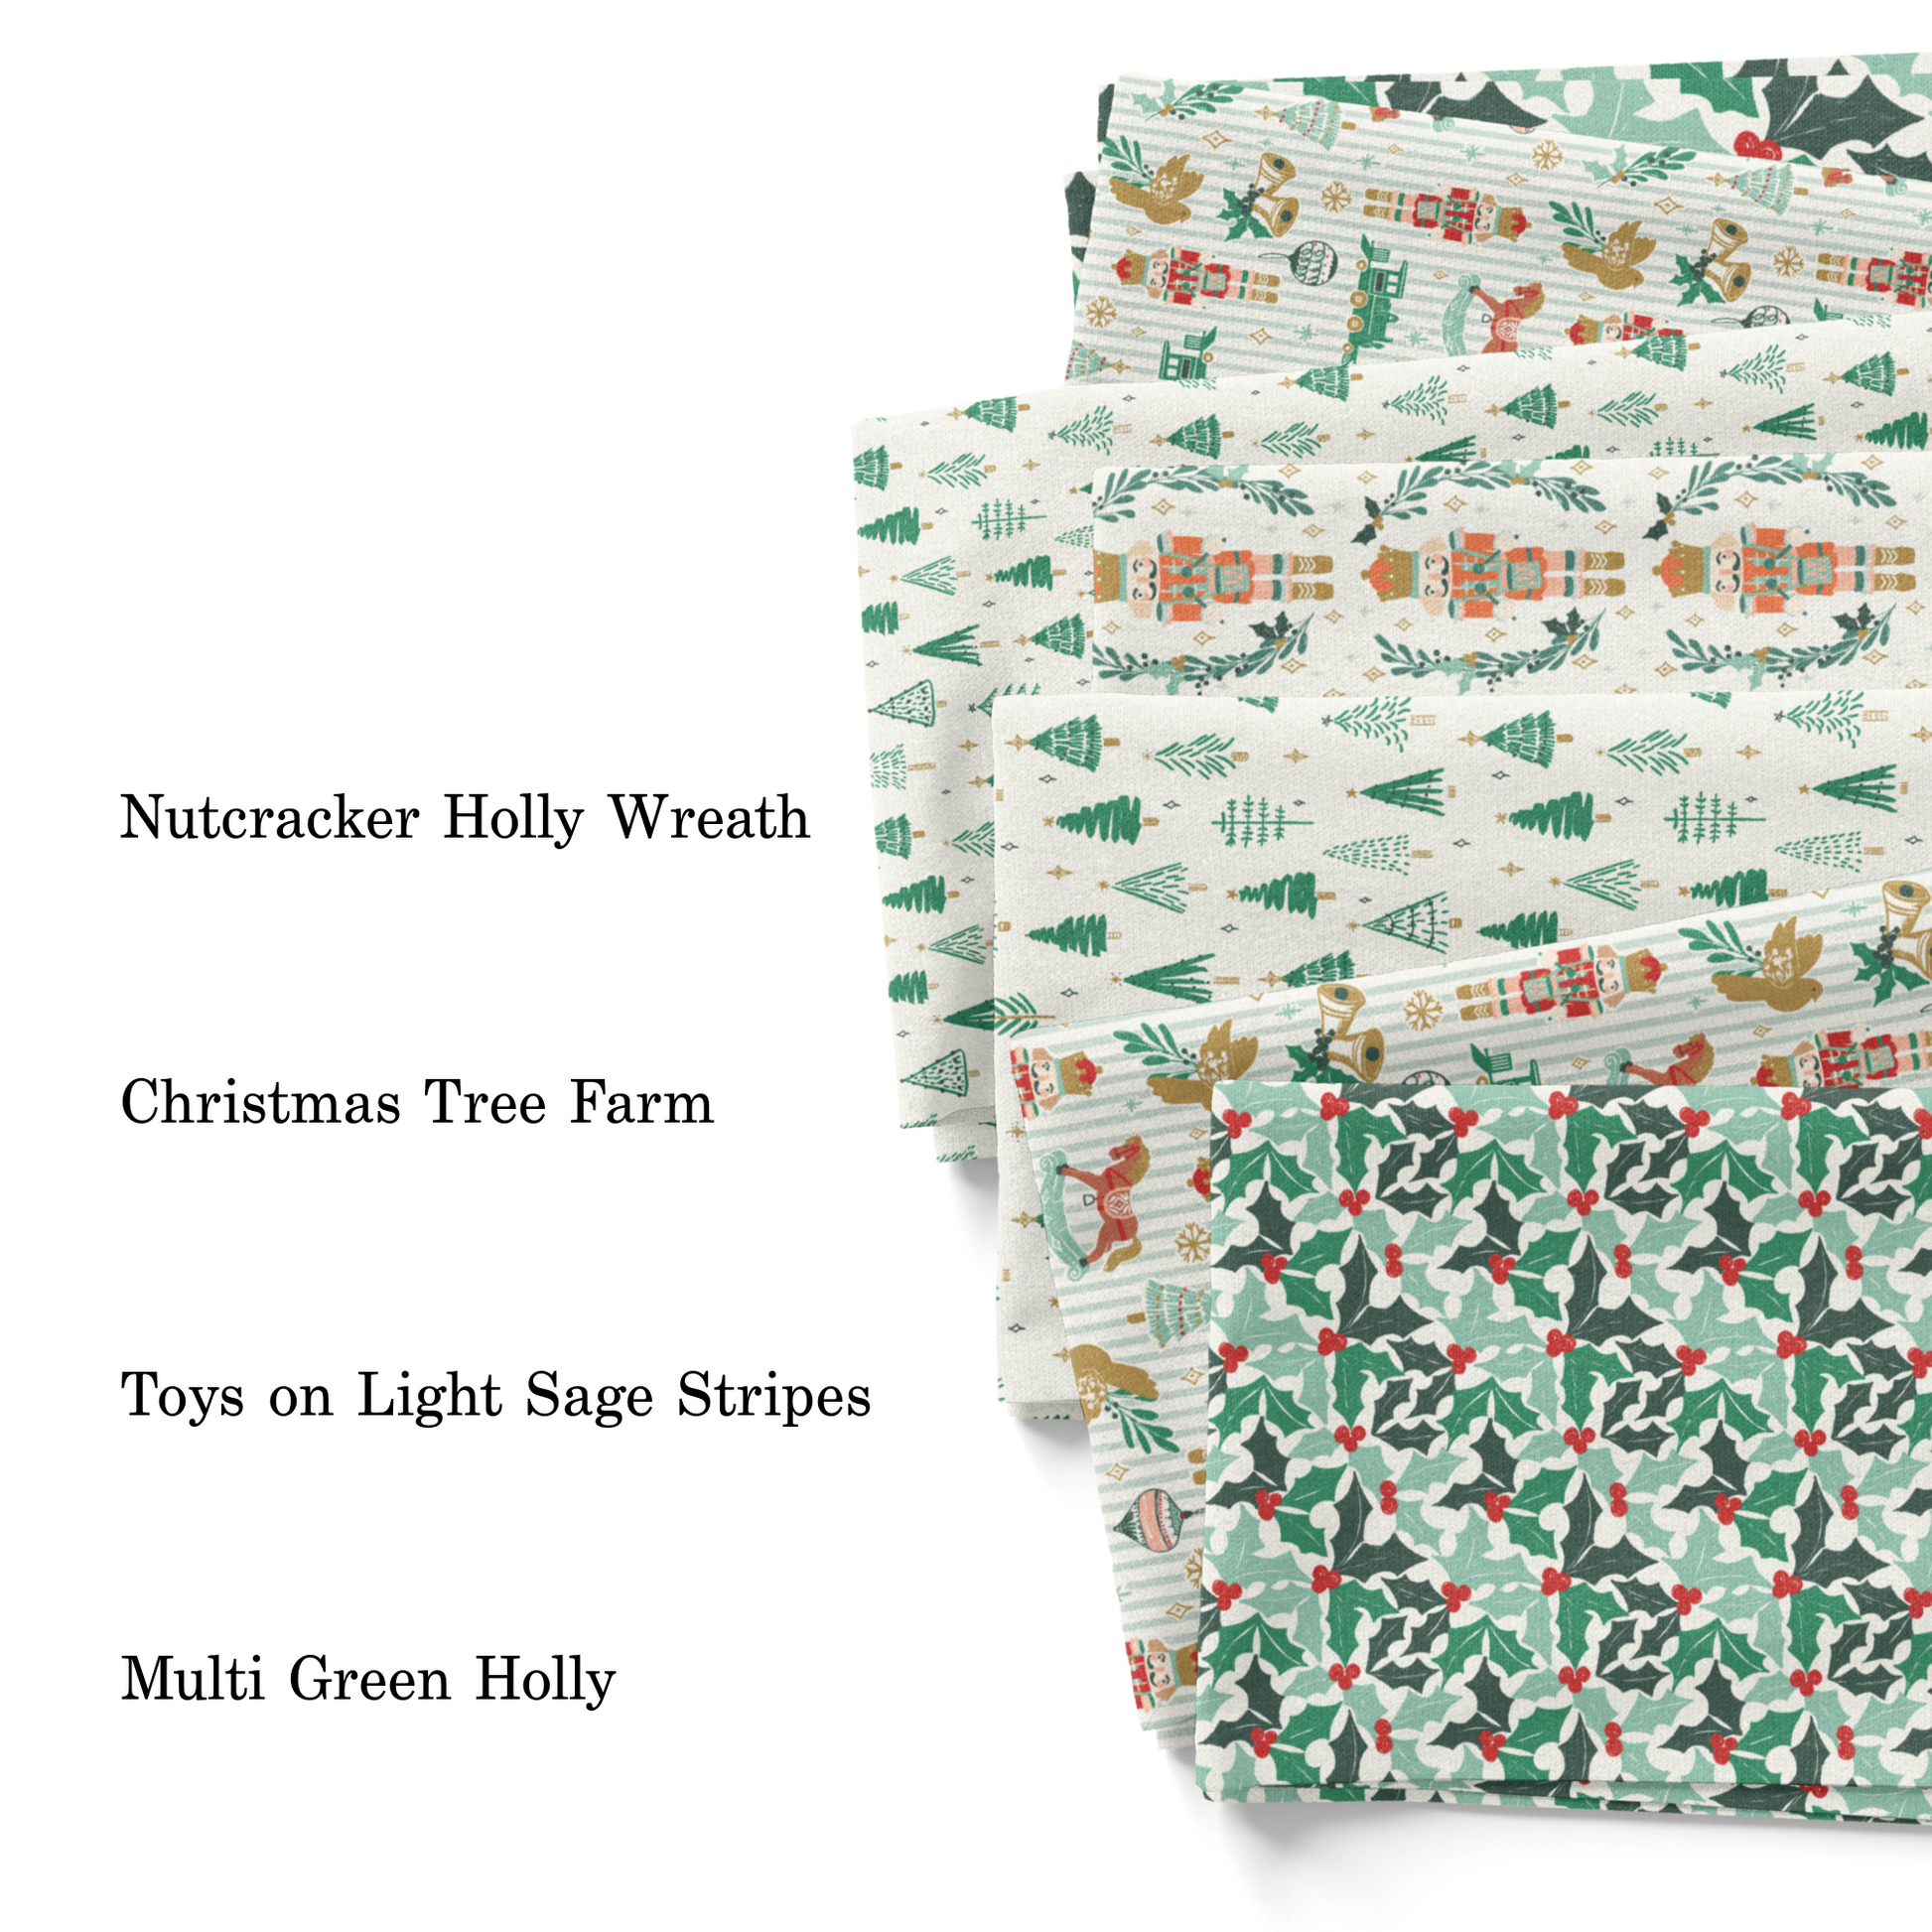 Hufton Studios Christmas fabric swatches with nutcrackers and holly leaves.